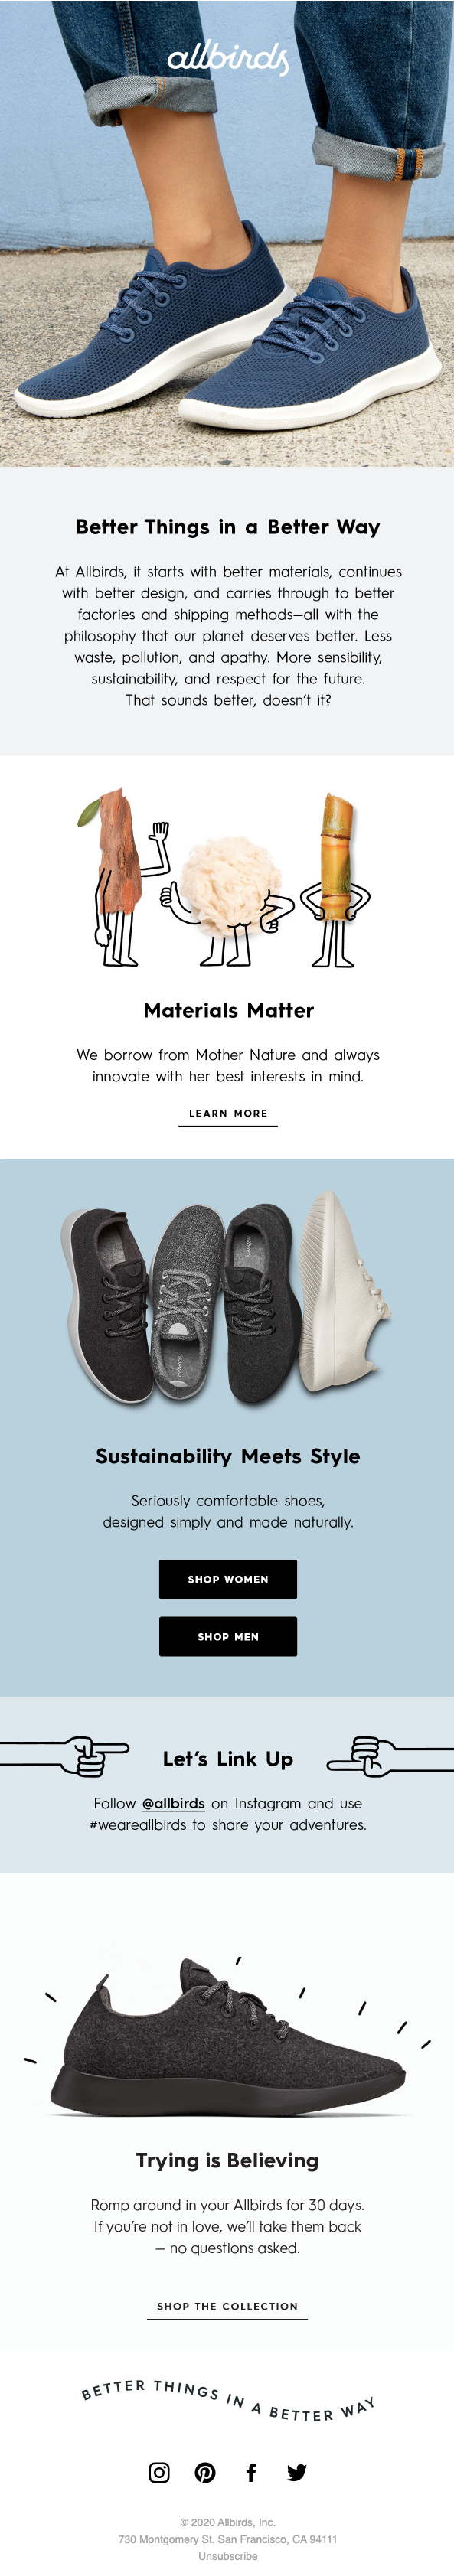 allbirds welcome email